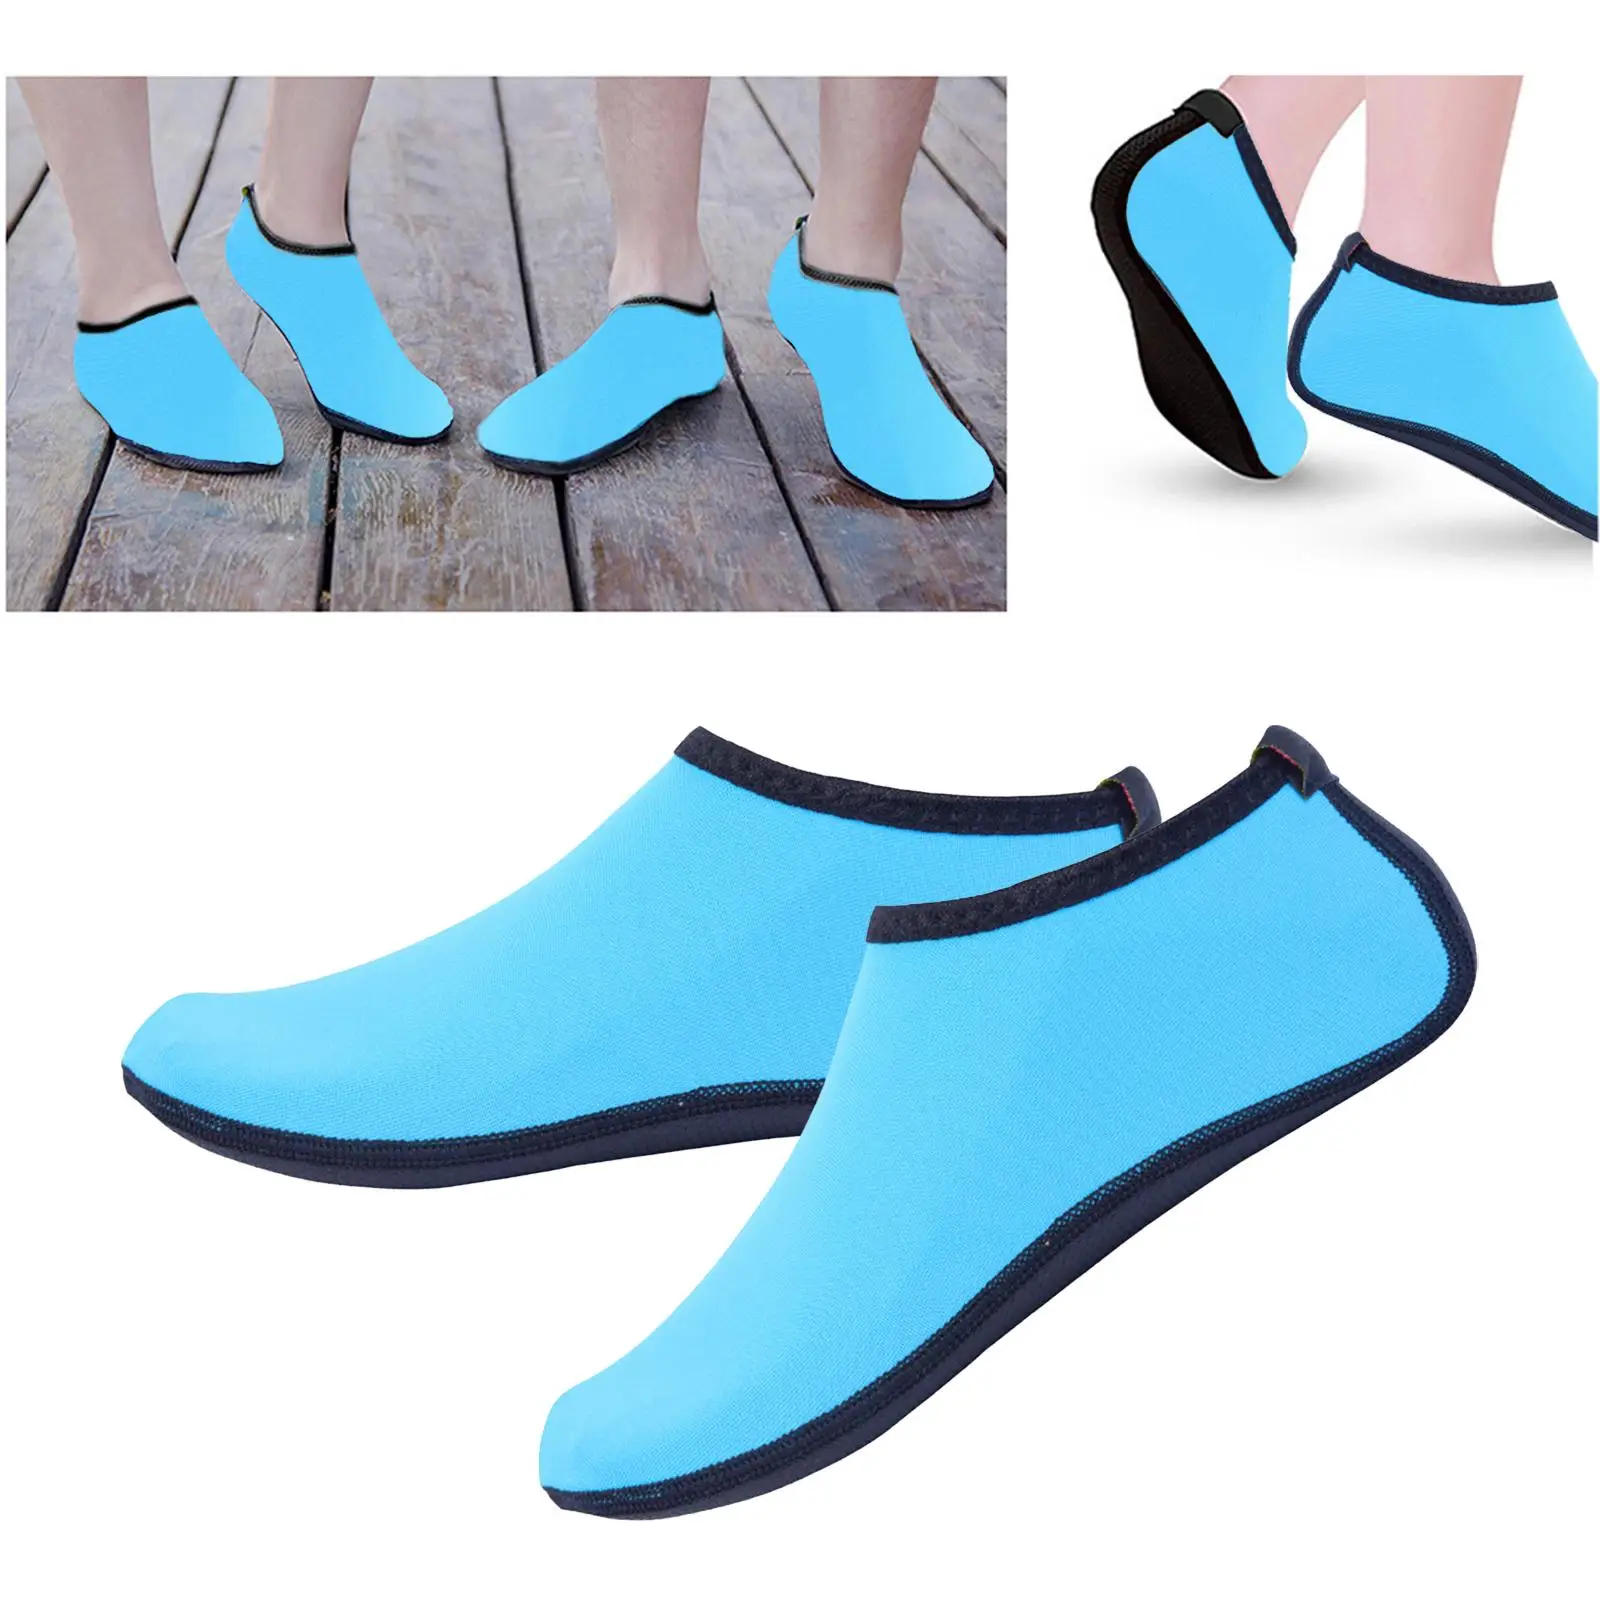 Dive Socks Swim Water Beach Socks for Snorkeling Surfing Breathable Smooth Neck Design Avoid Chafing